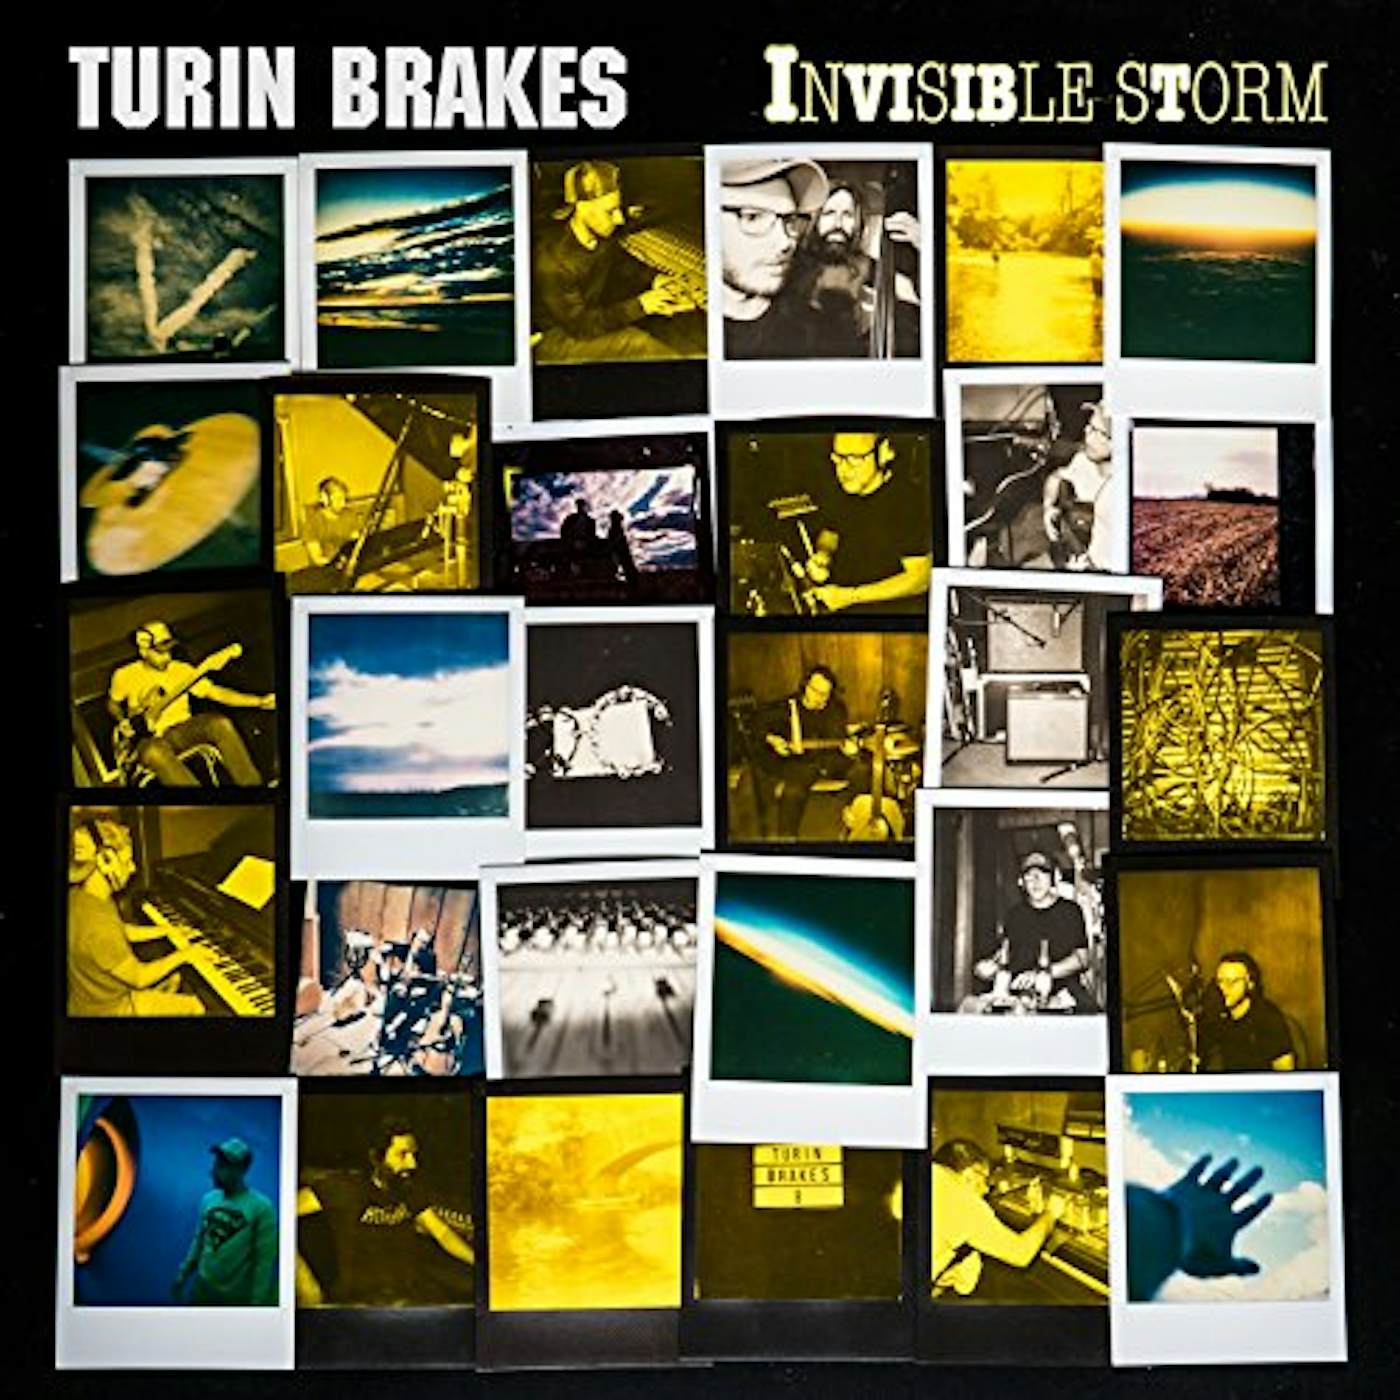 Turin Brakes INVISIBLE STORM CD